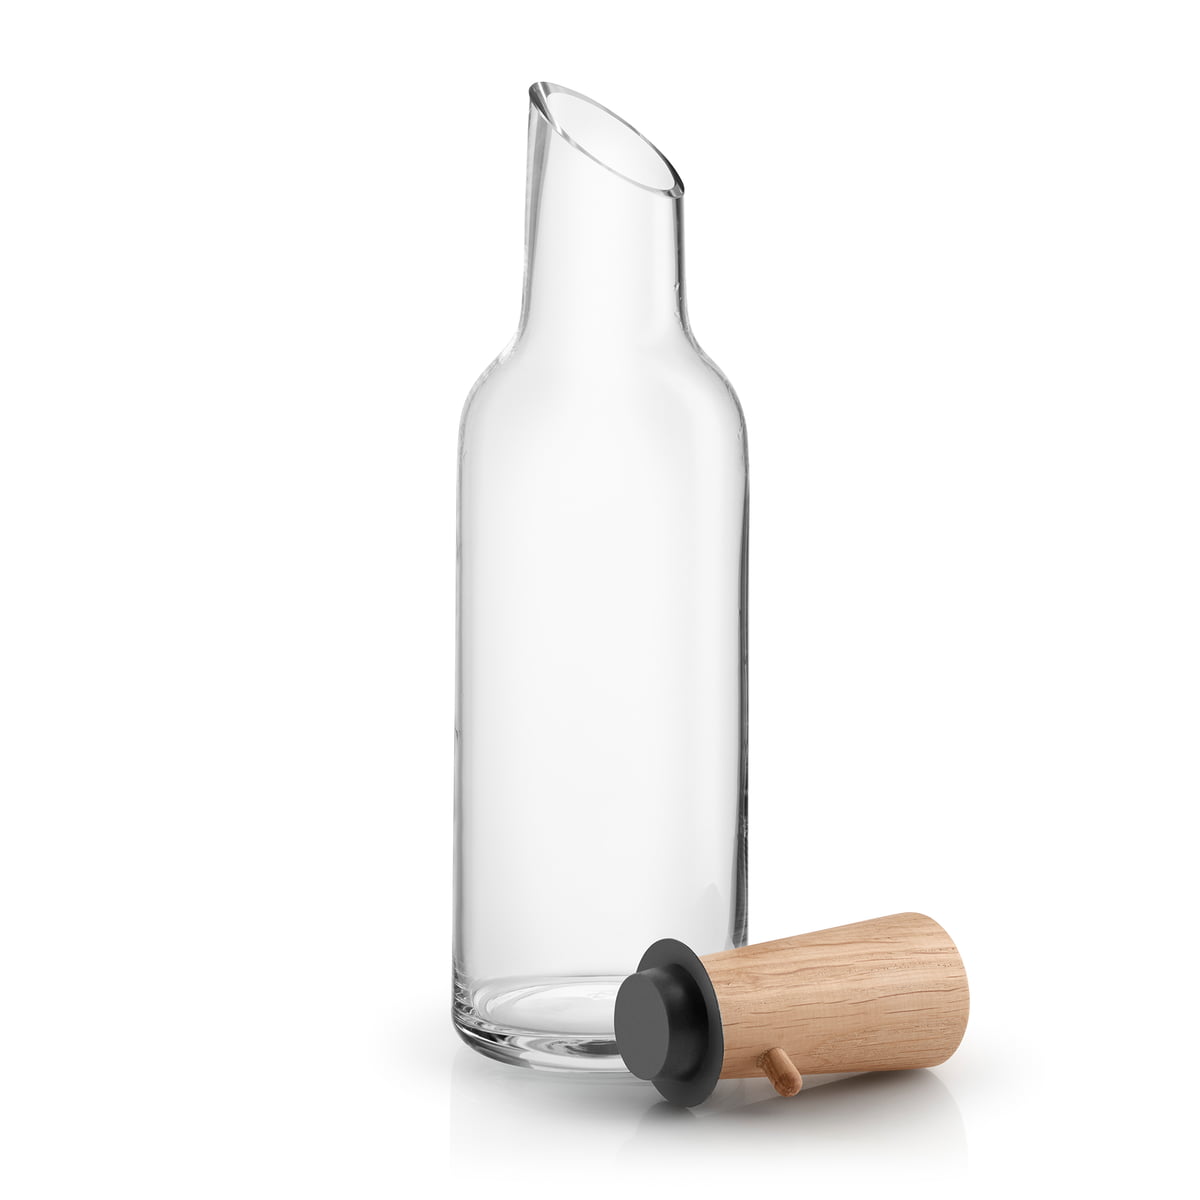 Glass Carafe with Cork Stopper